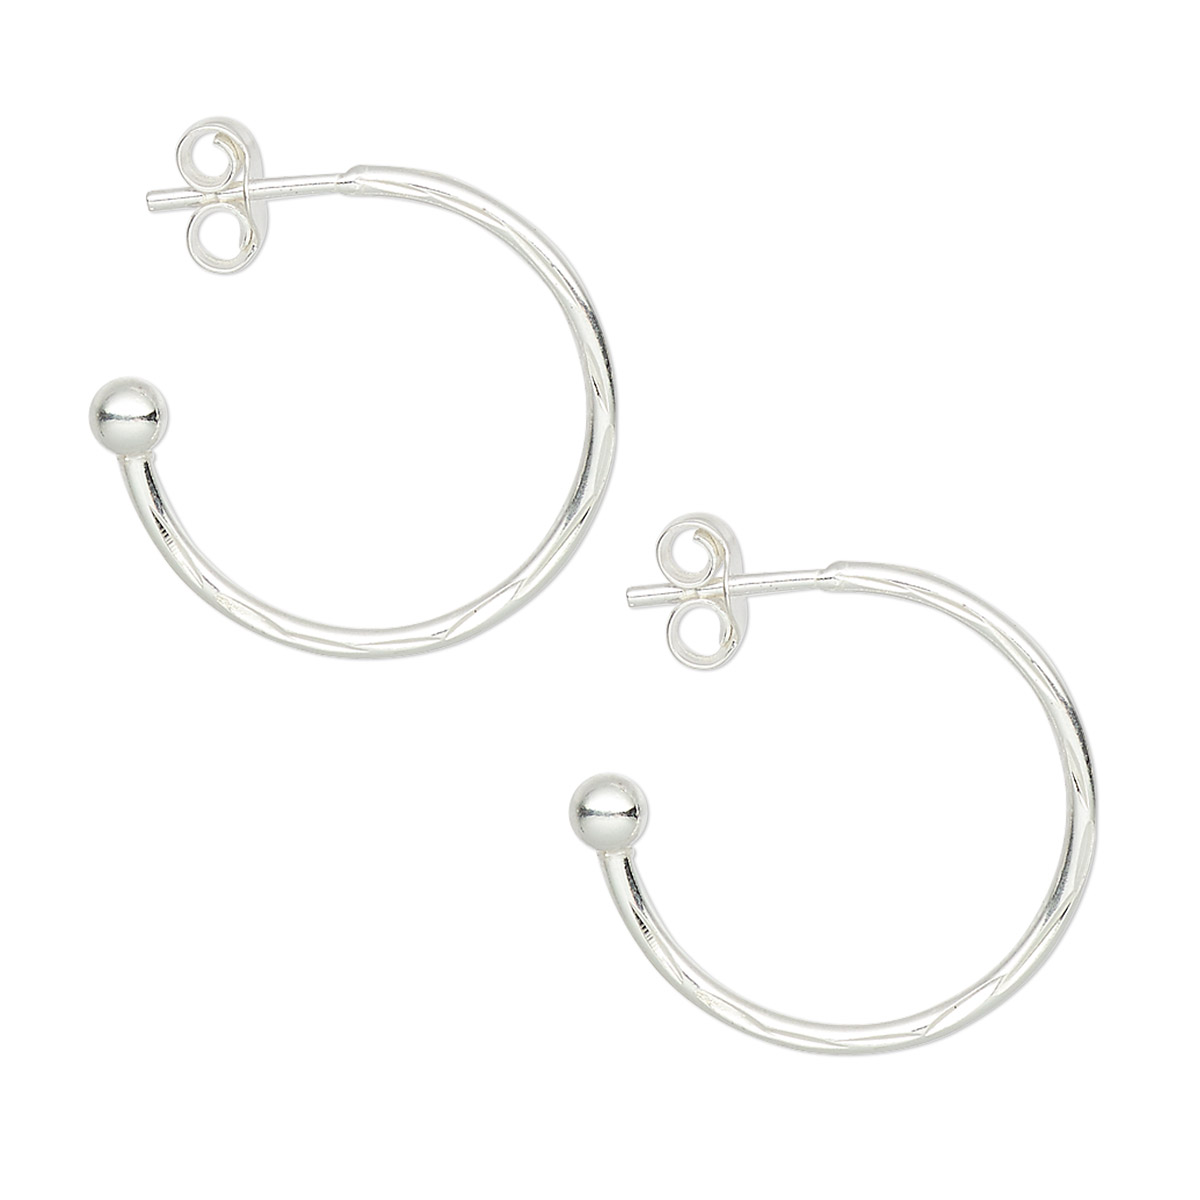 Earring, sterling silver, 18x1.5mm diamond-cut hoop with 3mm ball. Sold ...